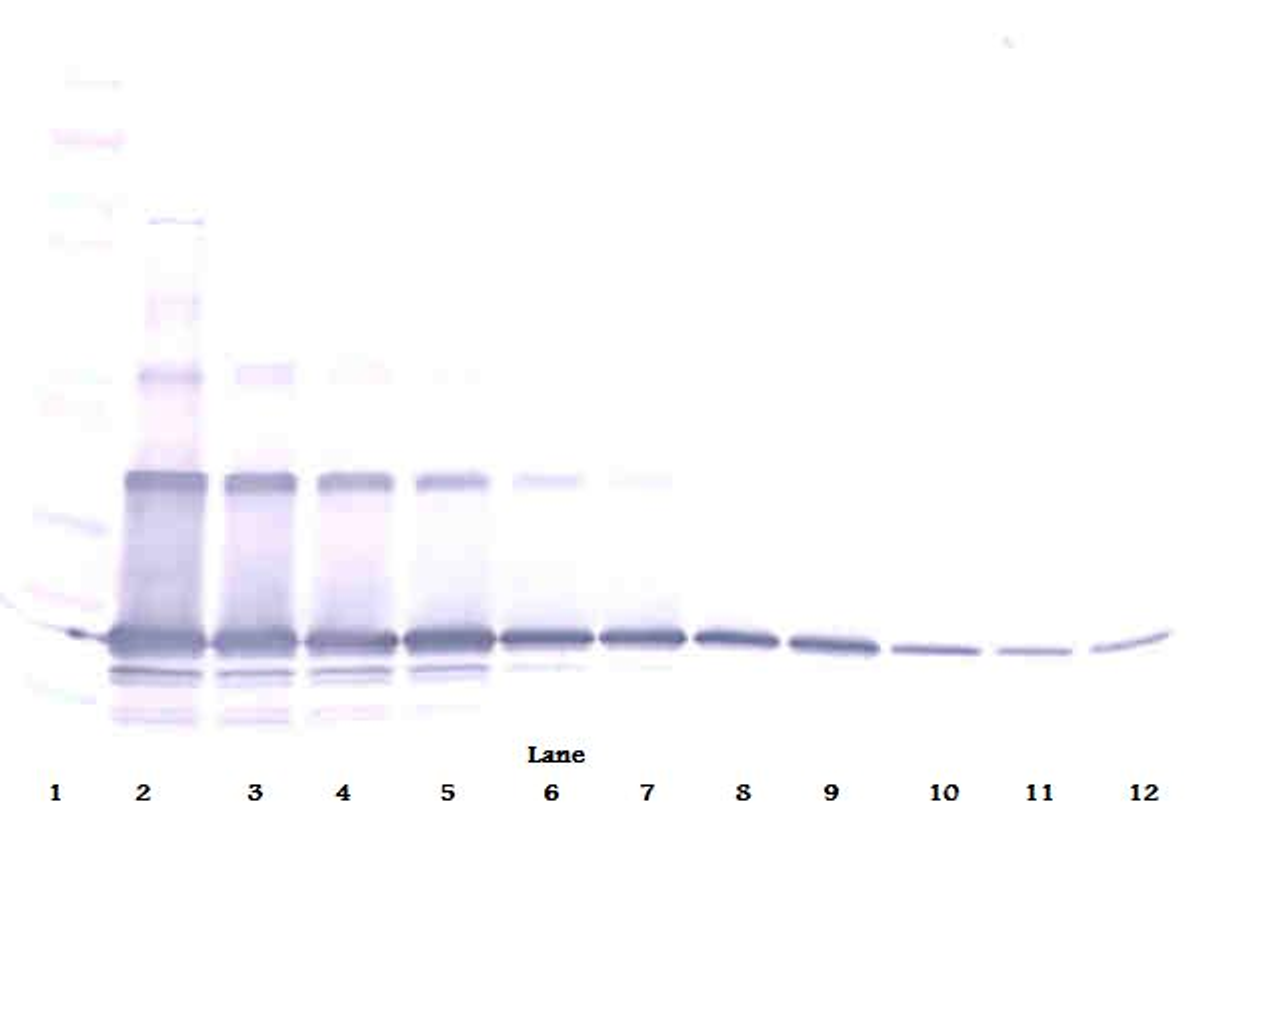 To detect hsRANKL by Western Blot analysis this antibody can be used at a concentration of 0.1 - 0.2 ug/ml. Used in conjunction with compatible secondary reagents the detection limit for recombinant hsRANKL is 1.5 - 3.0 ng/lane, under either reducing or non-reducing conditions.